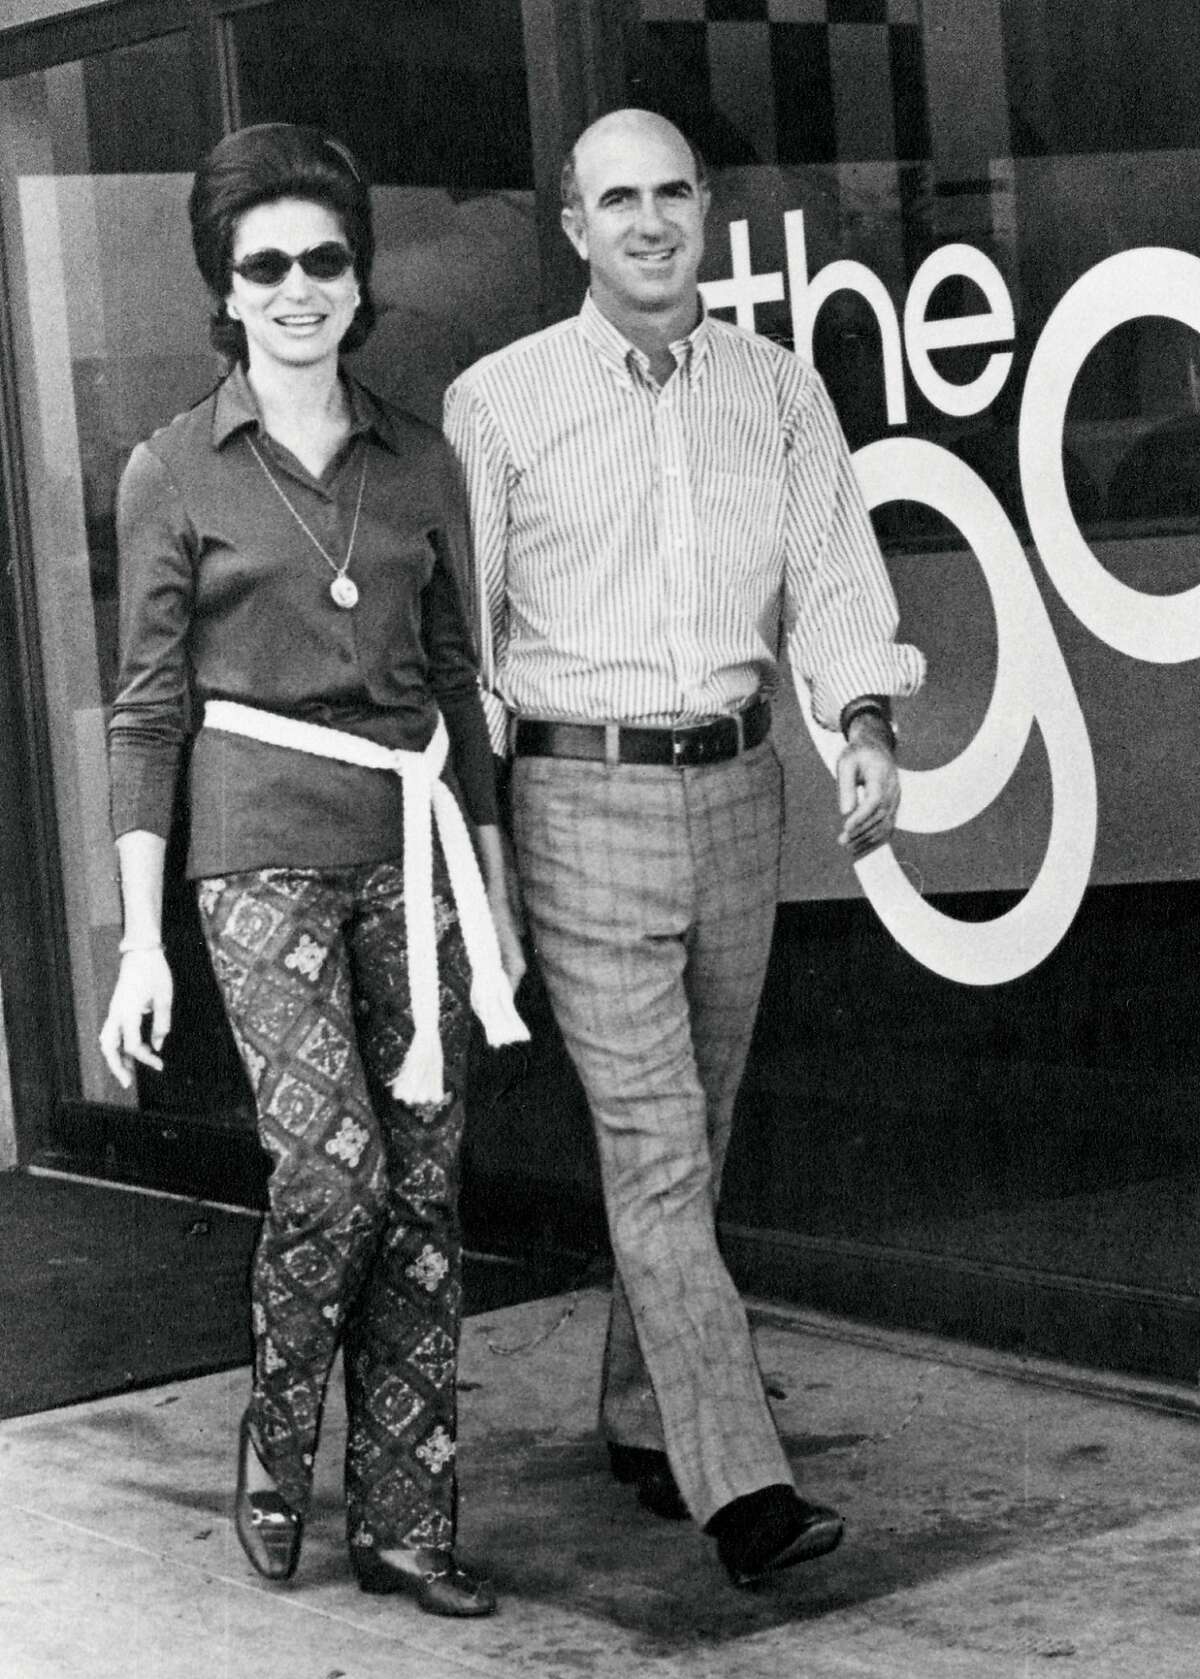 This 1969 photo provided by Gap Inc. shows Doris and Don Fisher in front of the first Gap store in San Francisco, Calif. Don Fisher, who co-founded clothing retailer Gap Inc., has died at age 81 after a long battle with cancer. The company said Fisher died at his home in San Francisco on Sunday, Sept. 27, 2009.